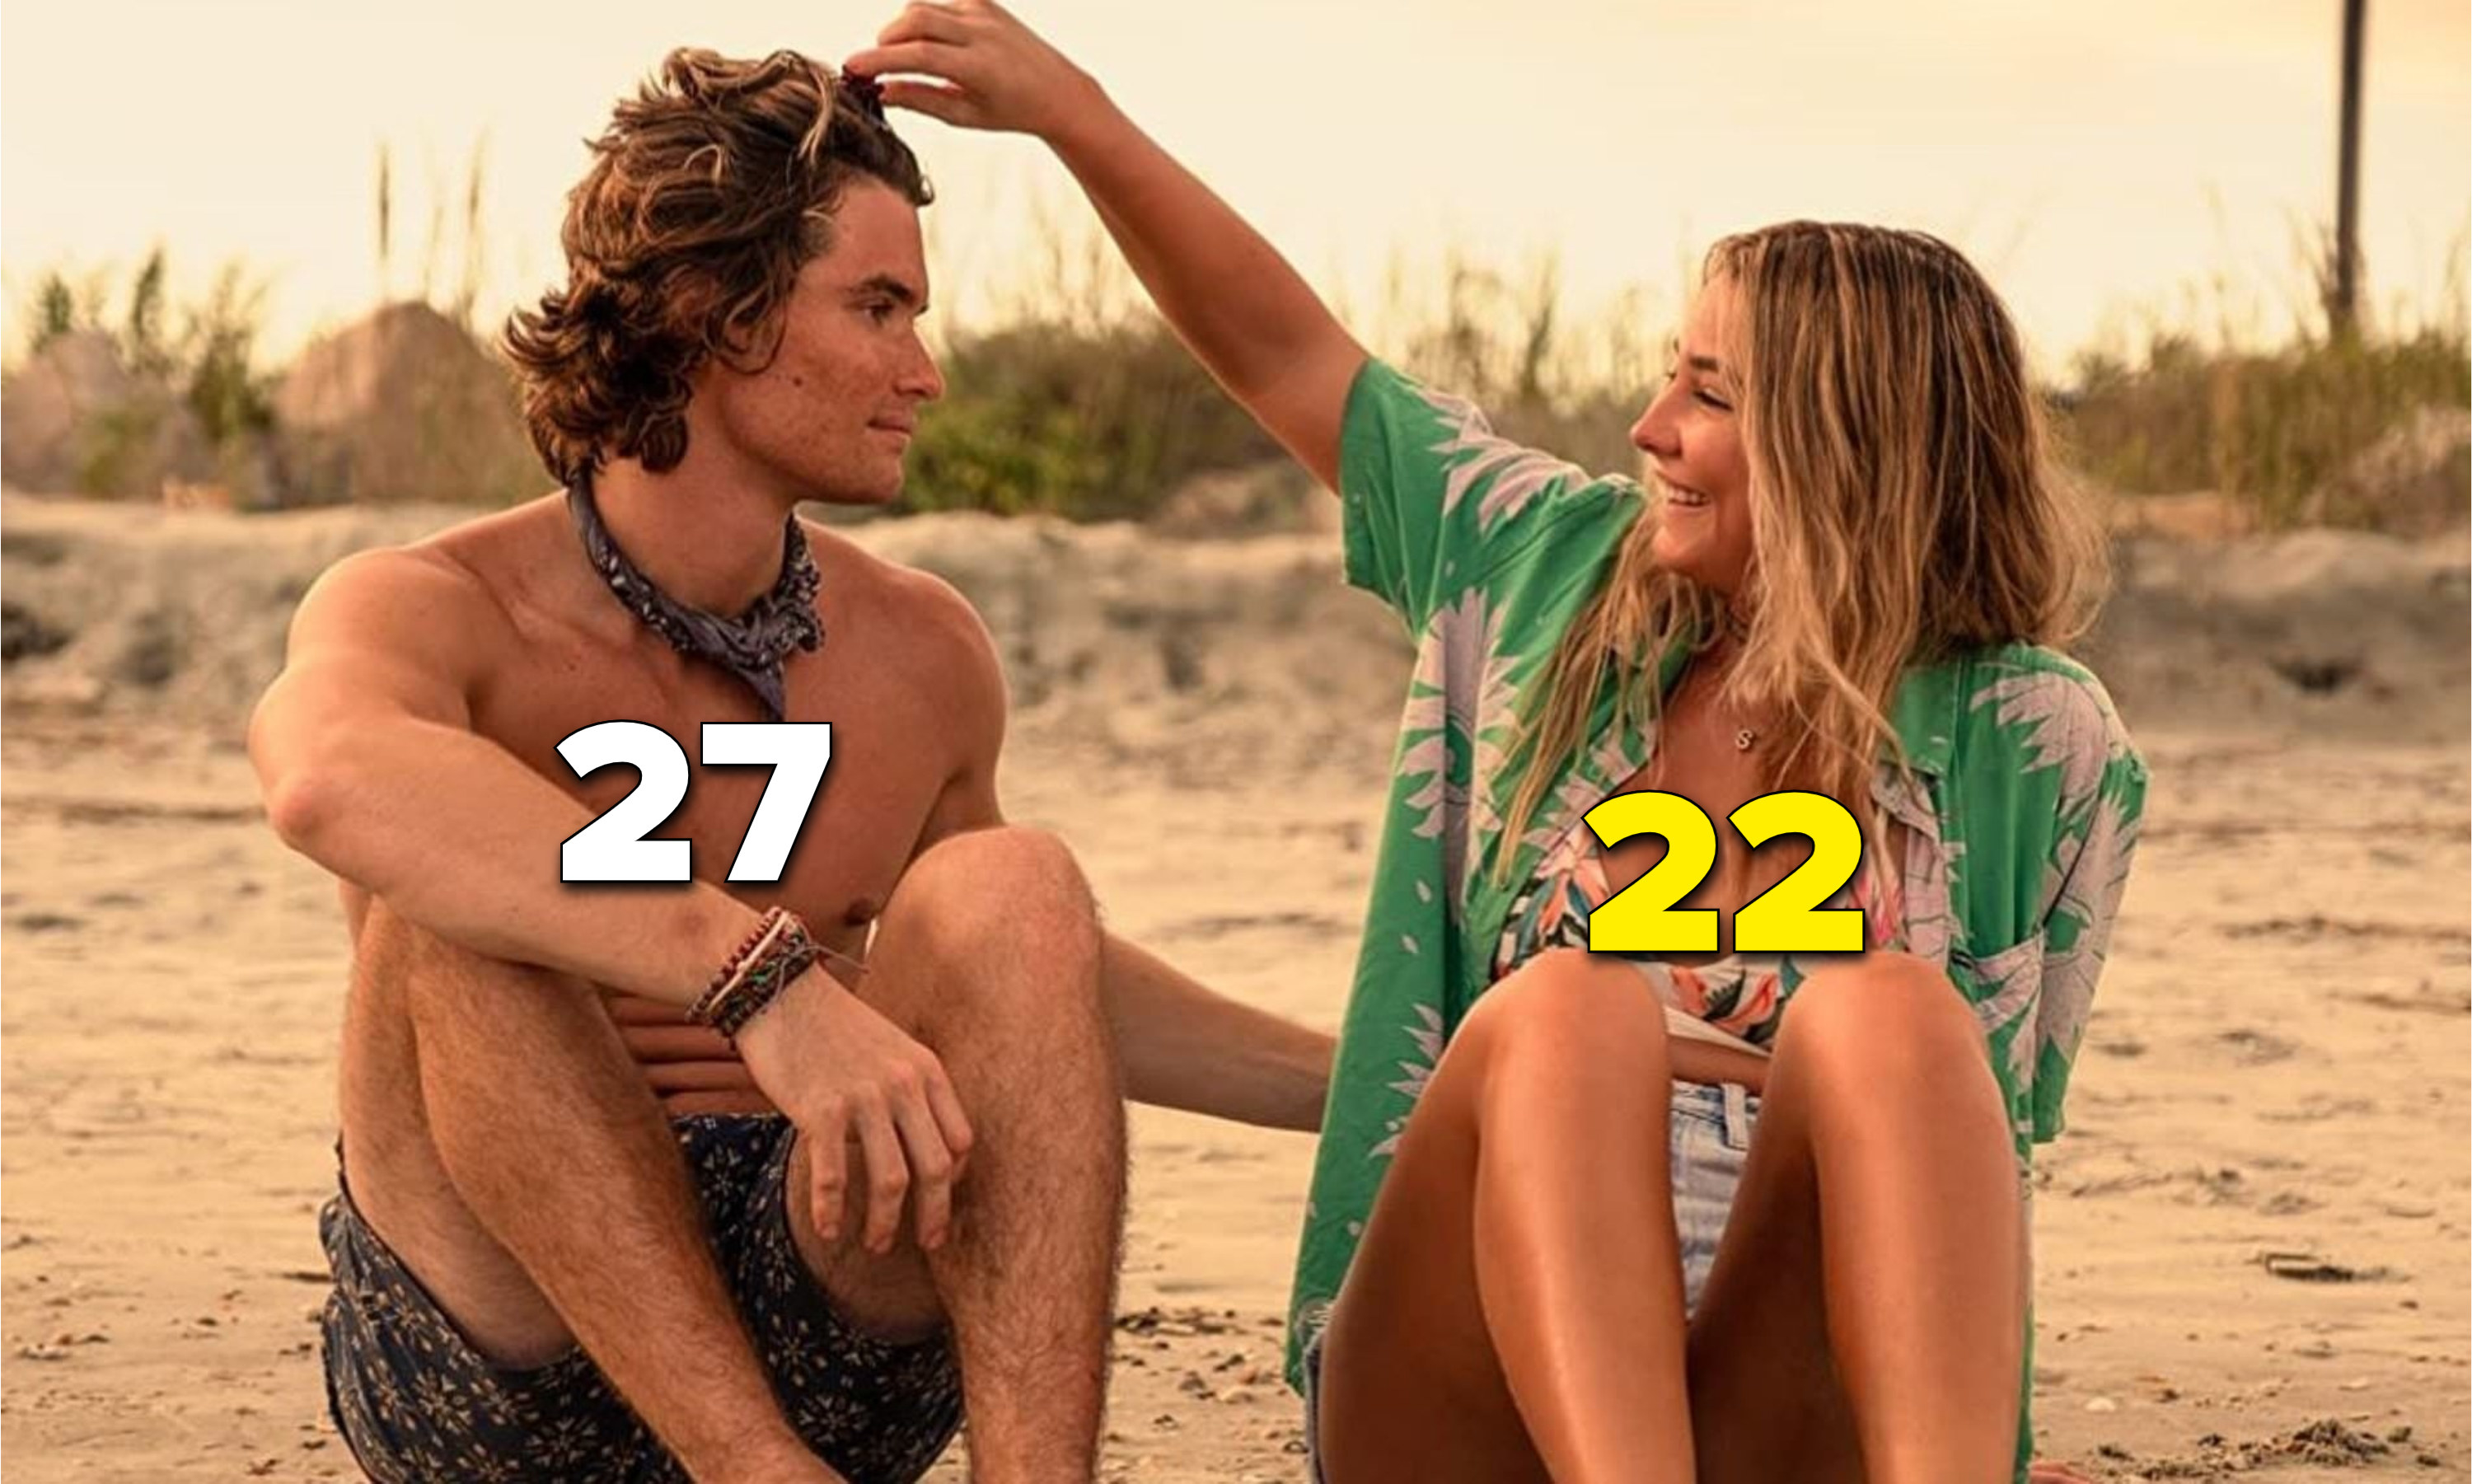 Chase Stokes at 27 and Madelyn Cline at 22, both playing high schoolers